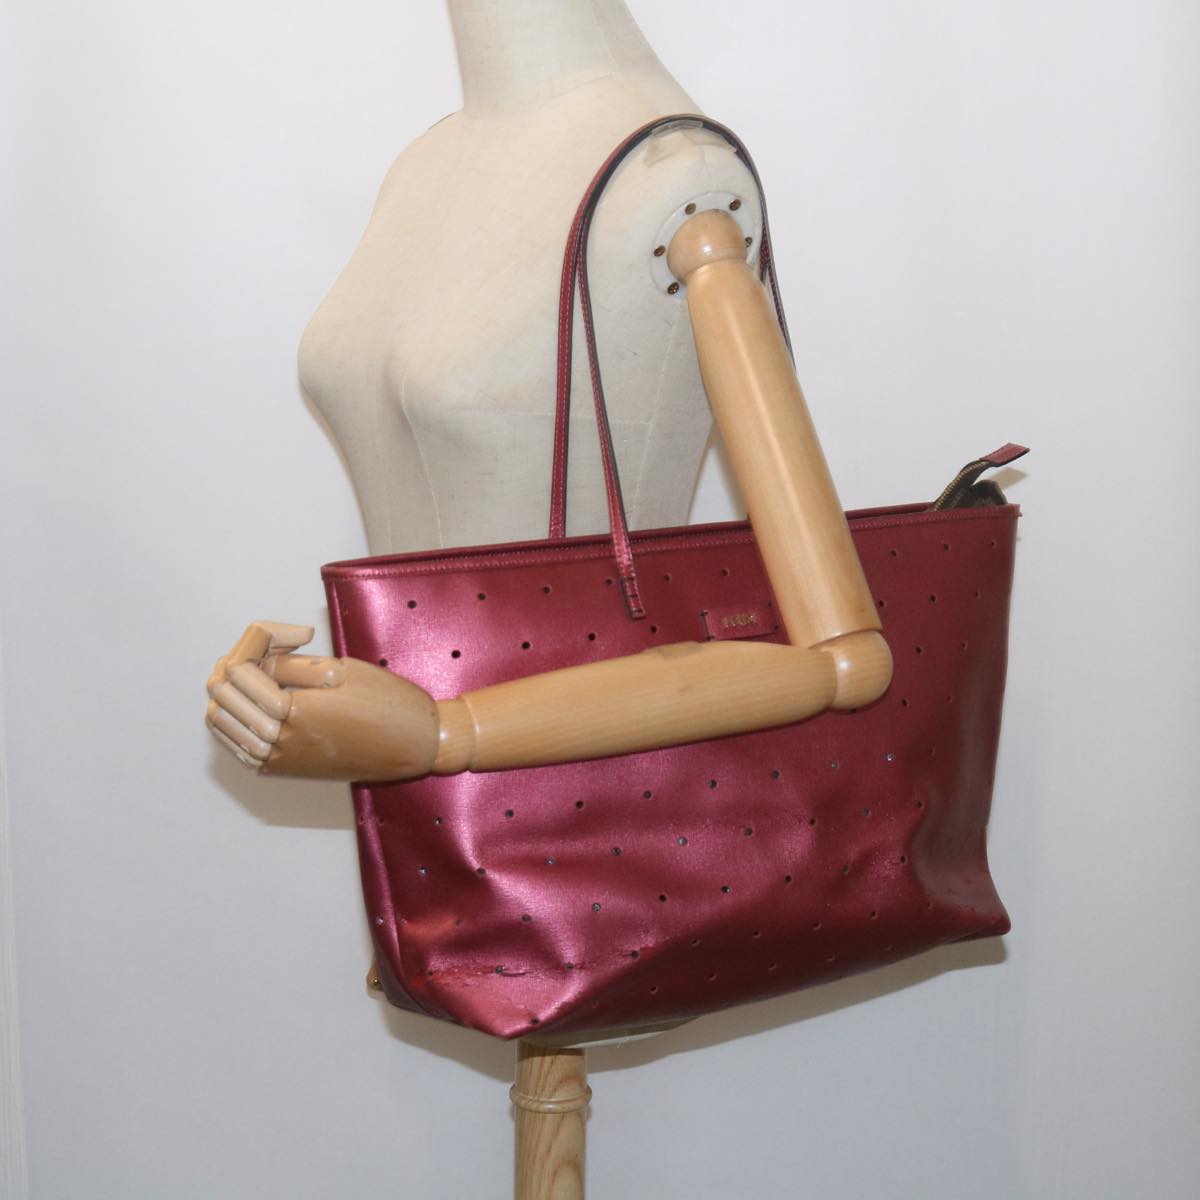 FENDI Tote Bag PVC Leather Pink Auth bs10480